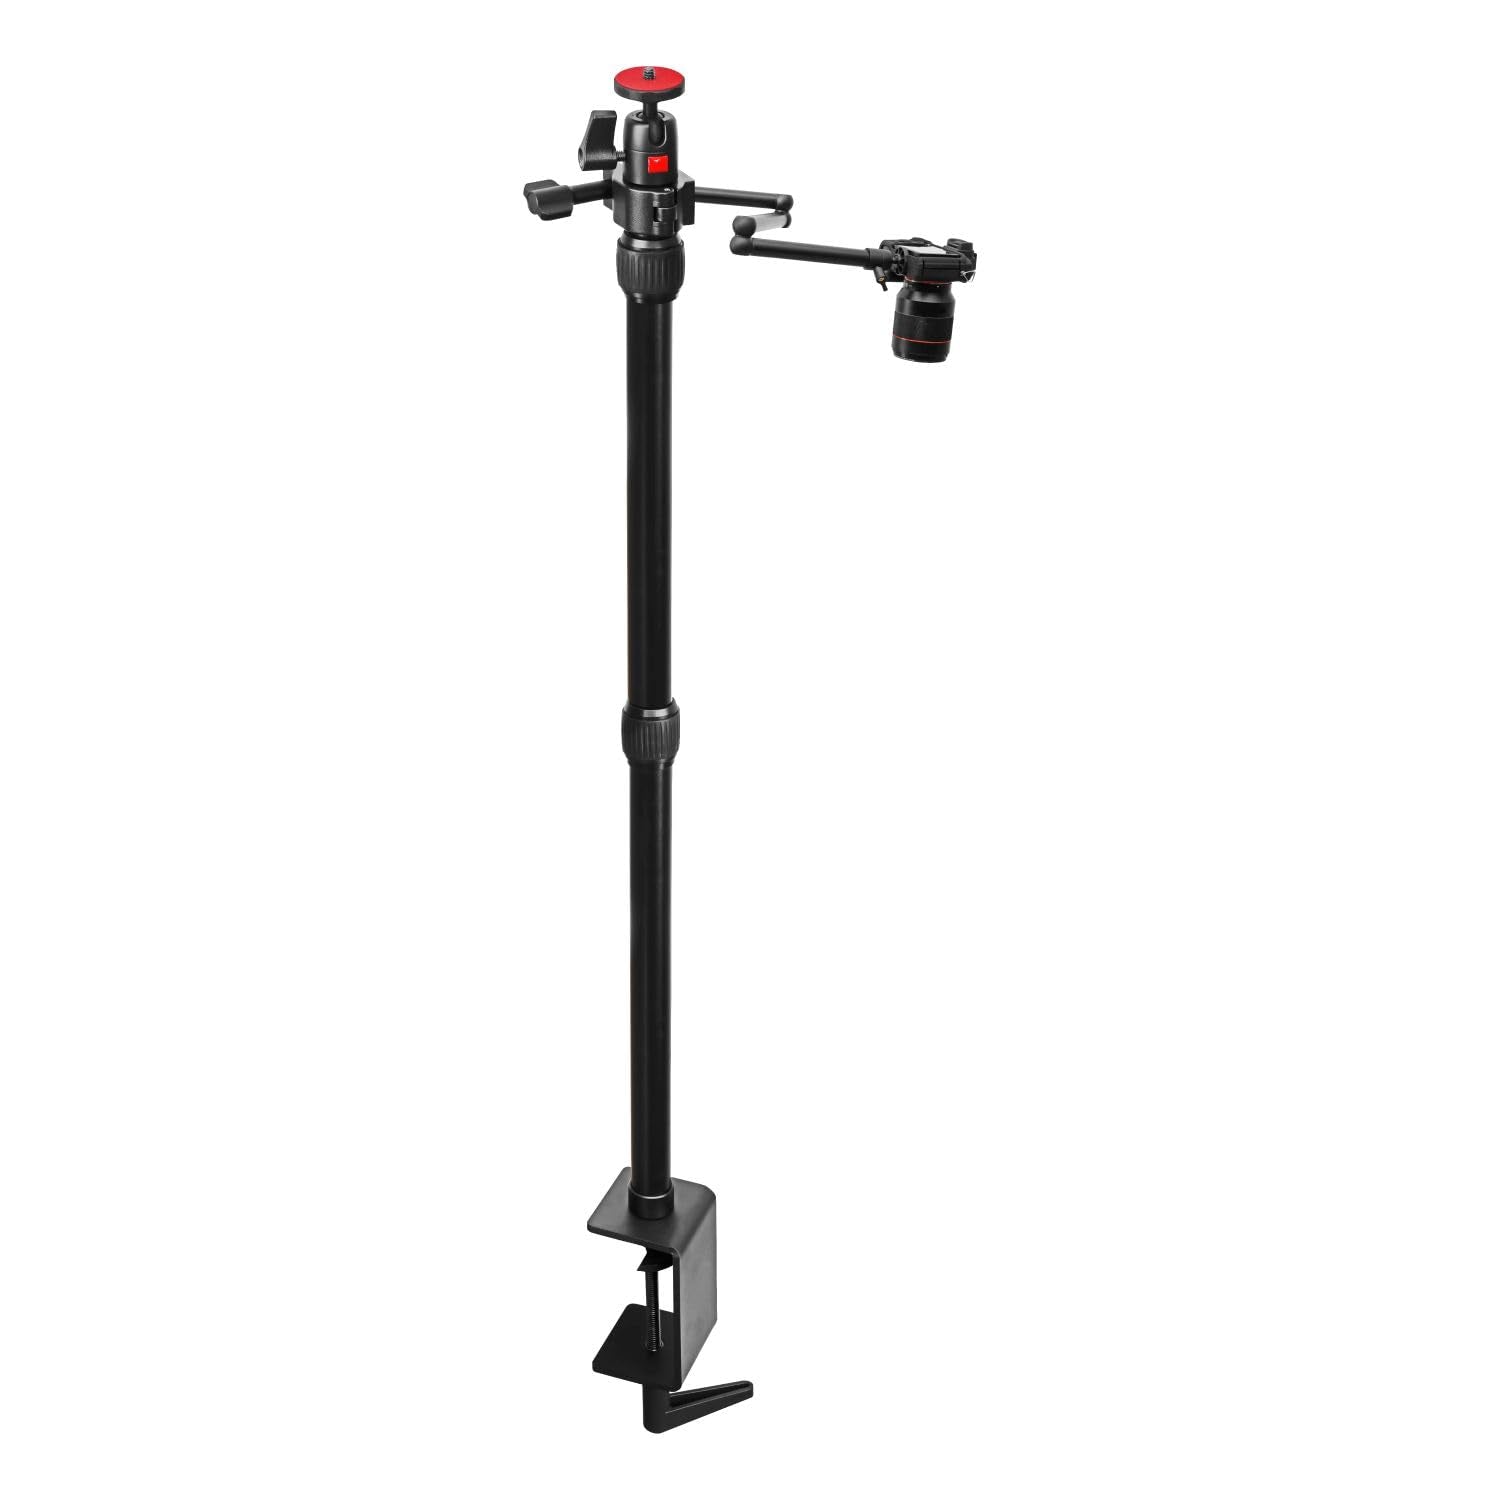 Digitek (DTMHA 001 )Table Mount with Auxiliary Holding Arm for Stream, Overhead Video, Desktop, Bedroom, Bedhead, Office